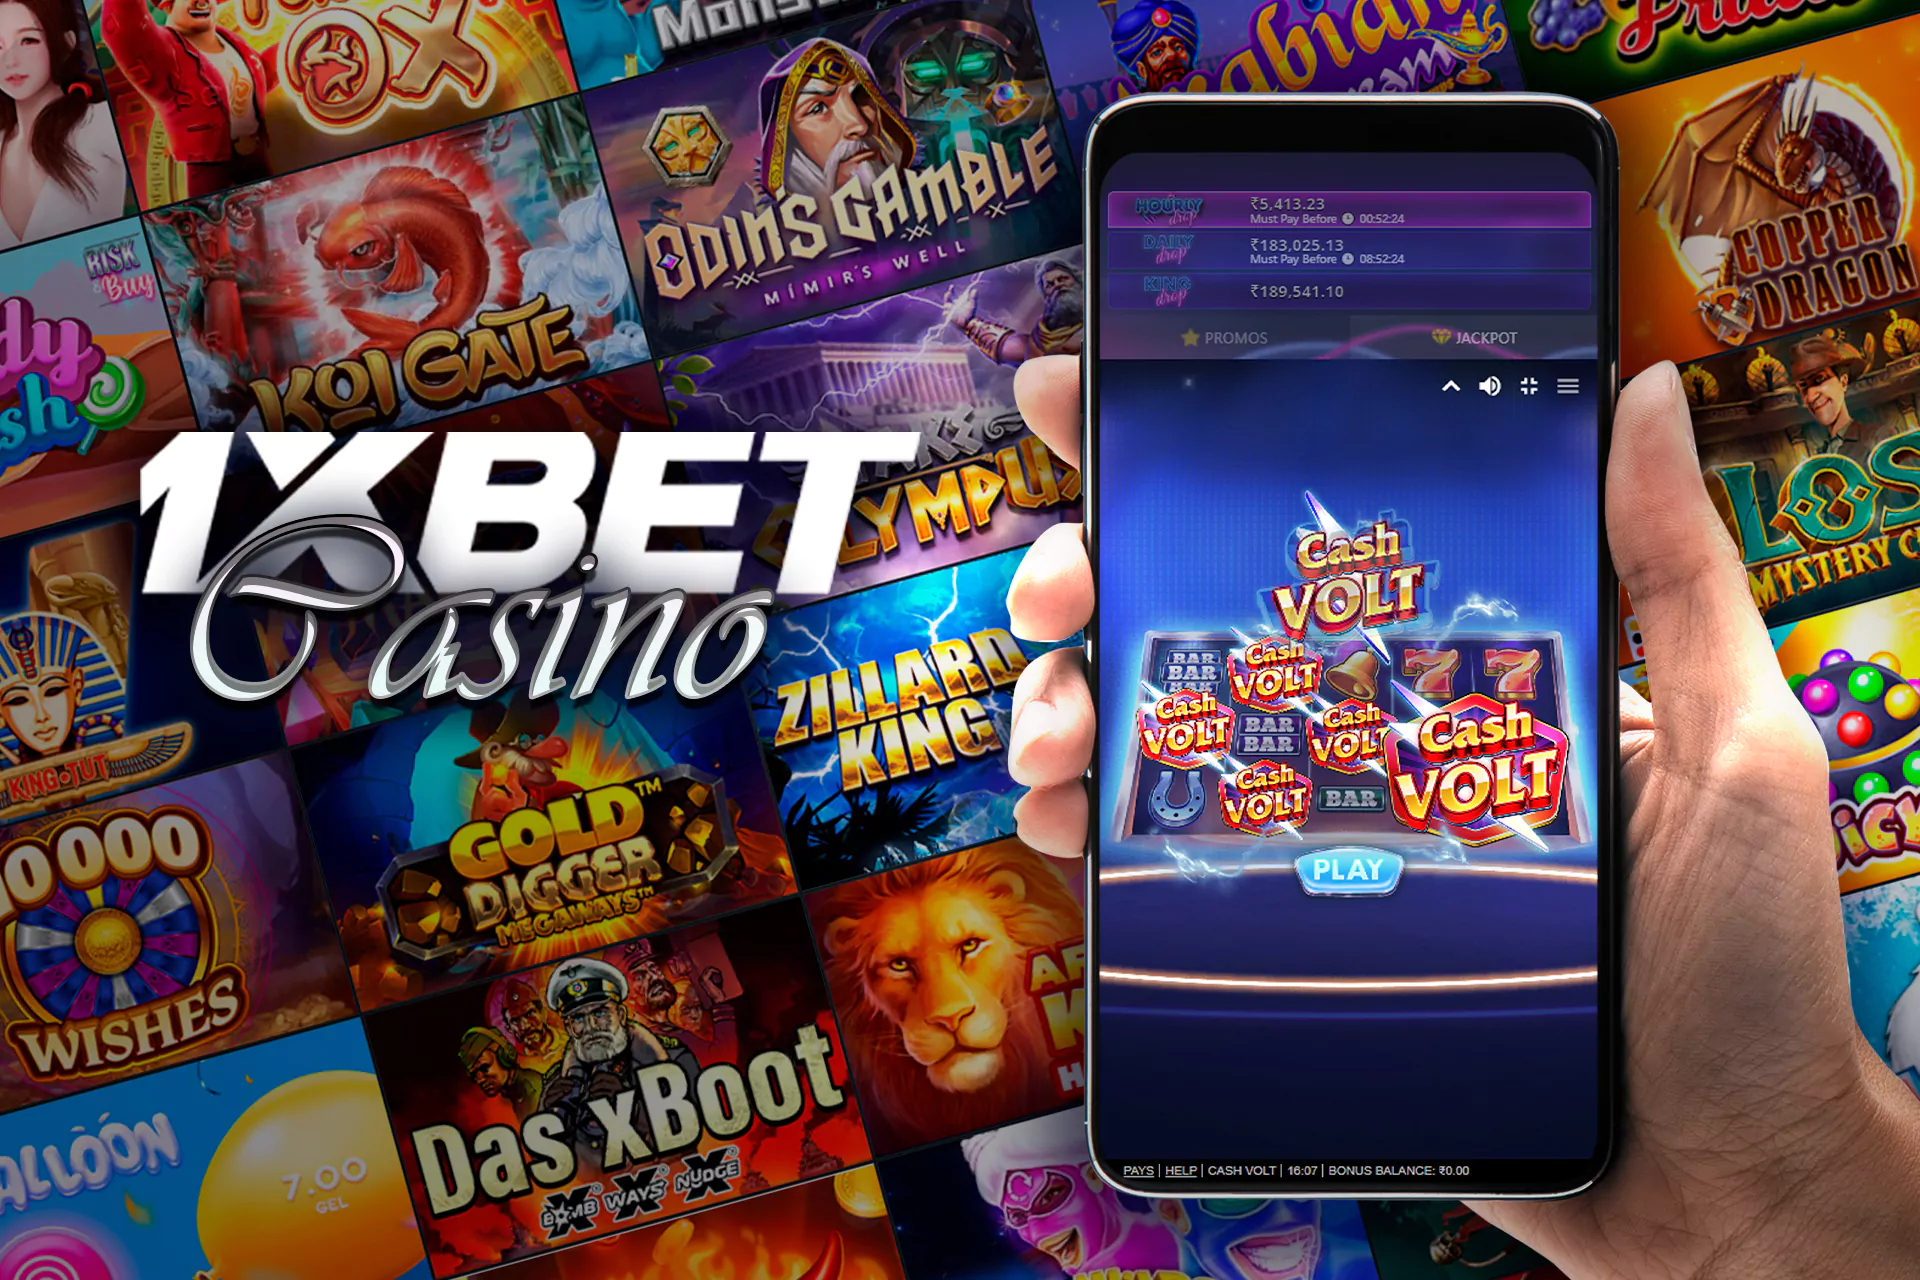 In the app 1xBet is available many casino games.